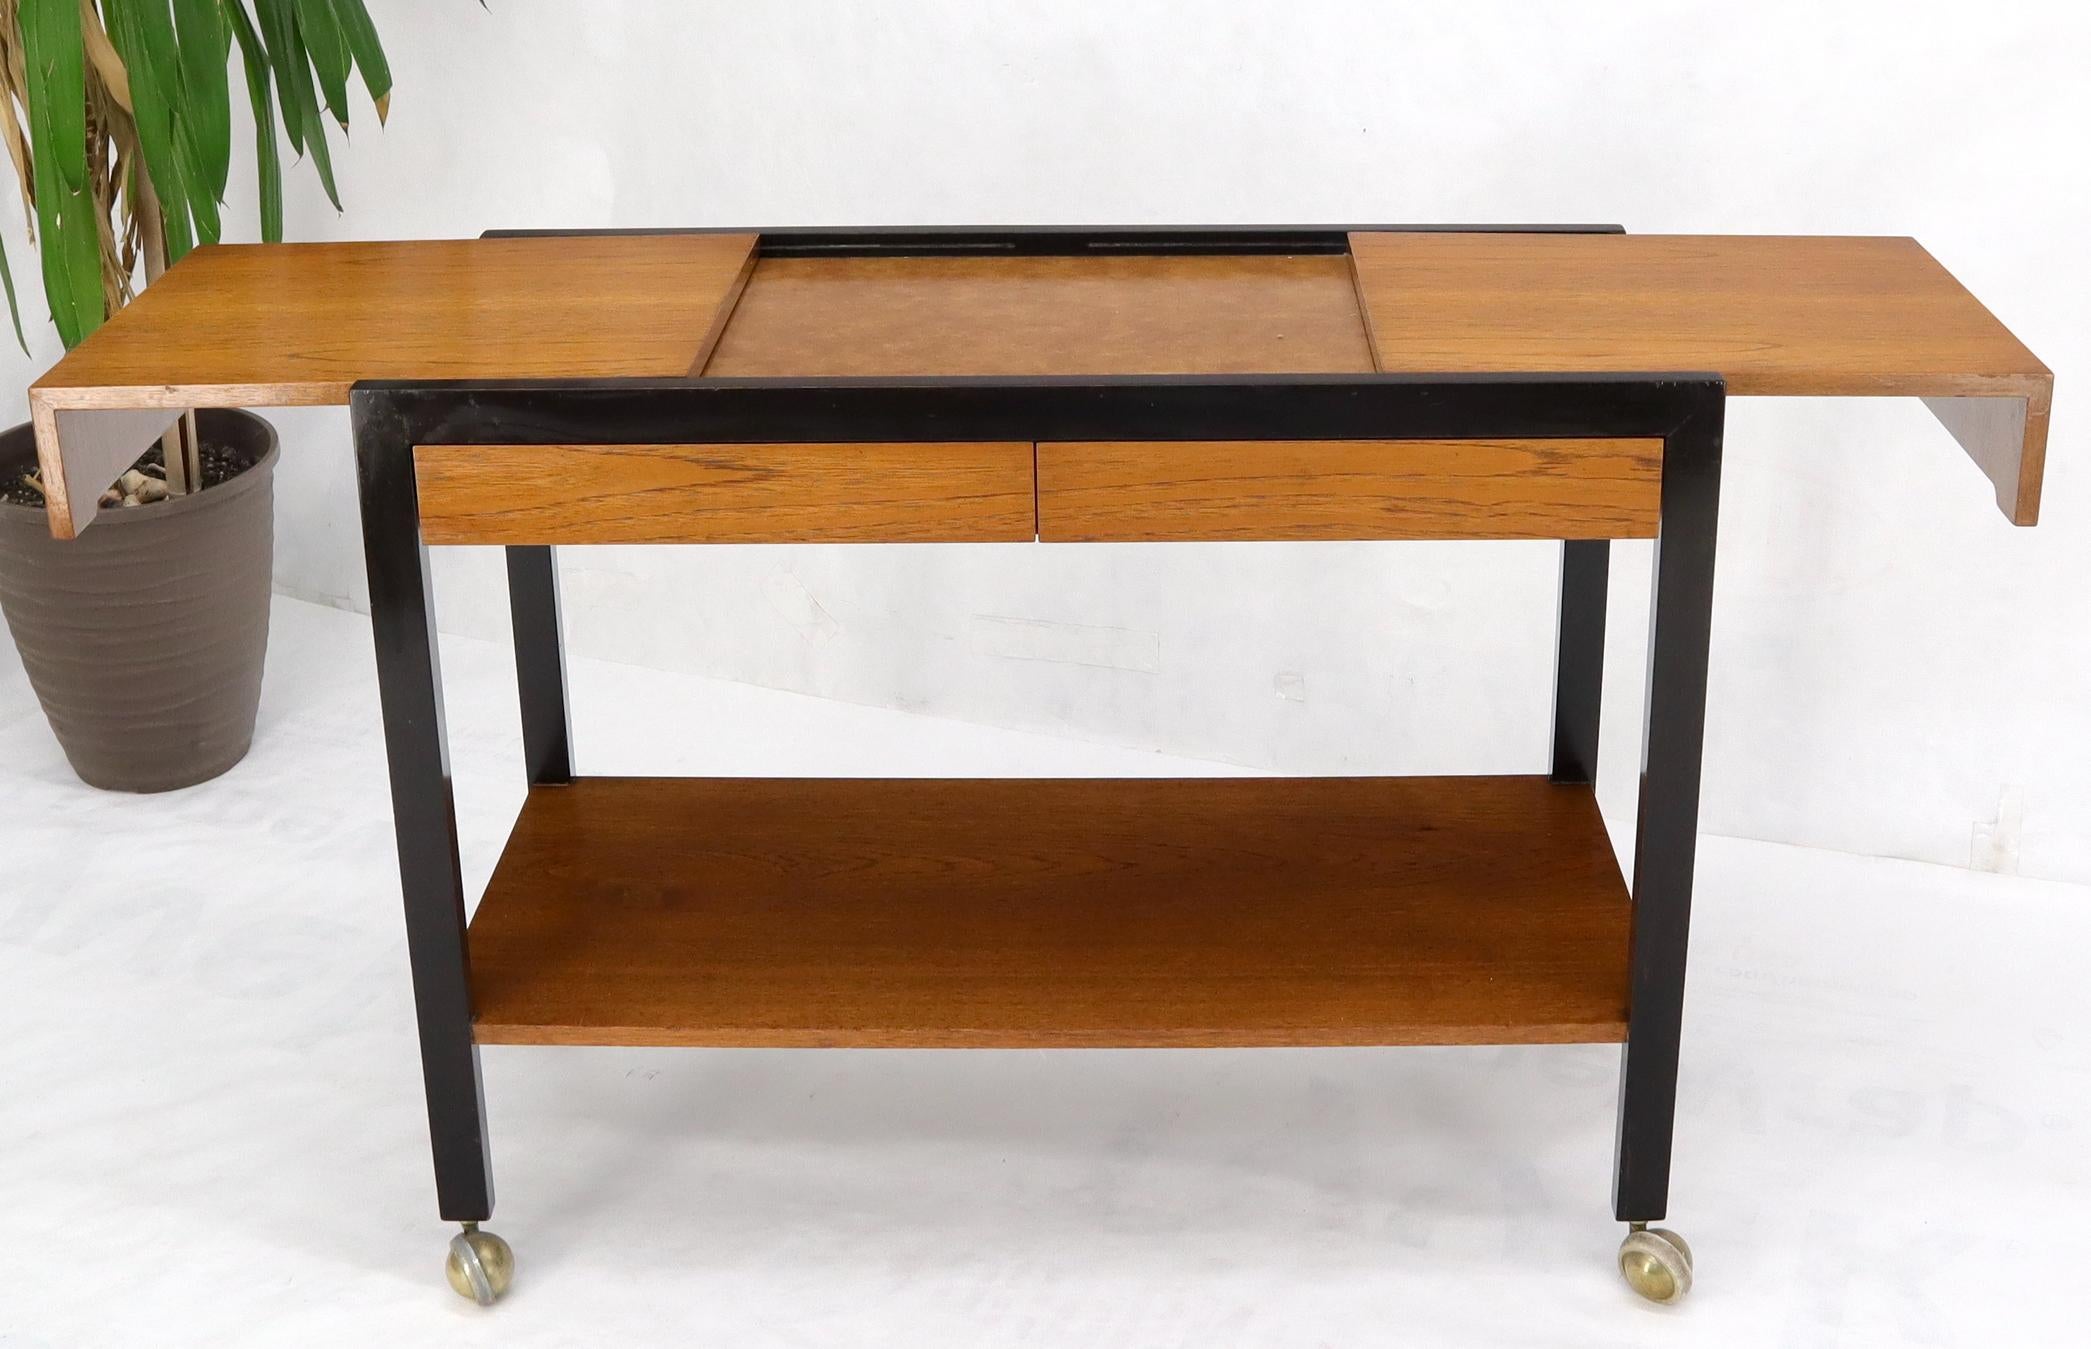 Mid-Century Modern Harvey Prober two tier two drawers serving cart on wheels. Opens up to 59